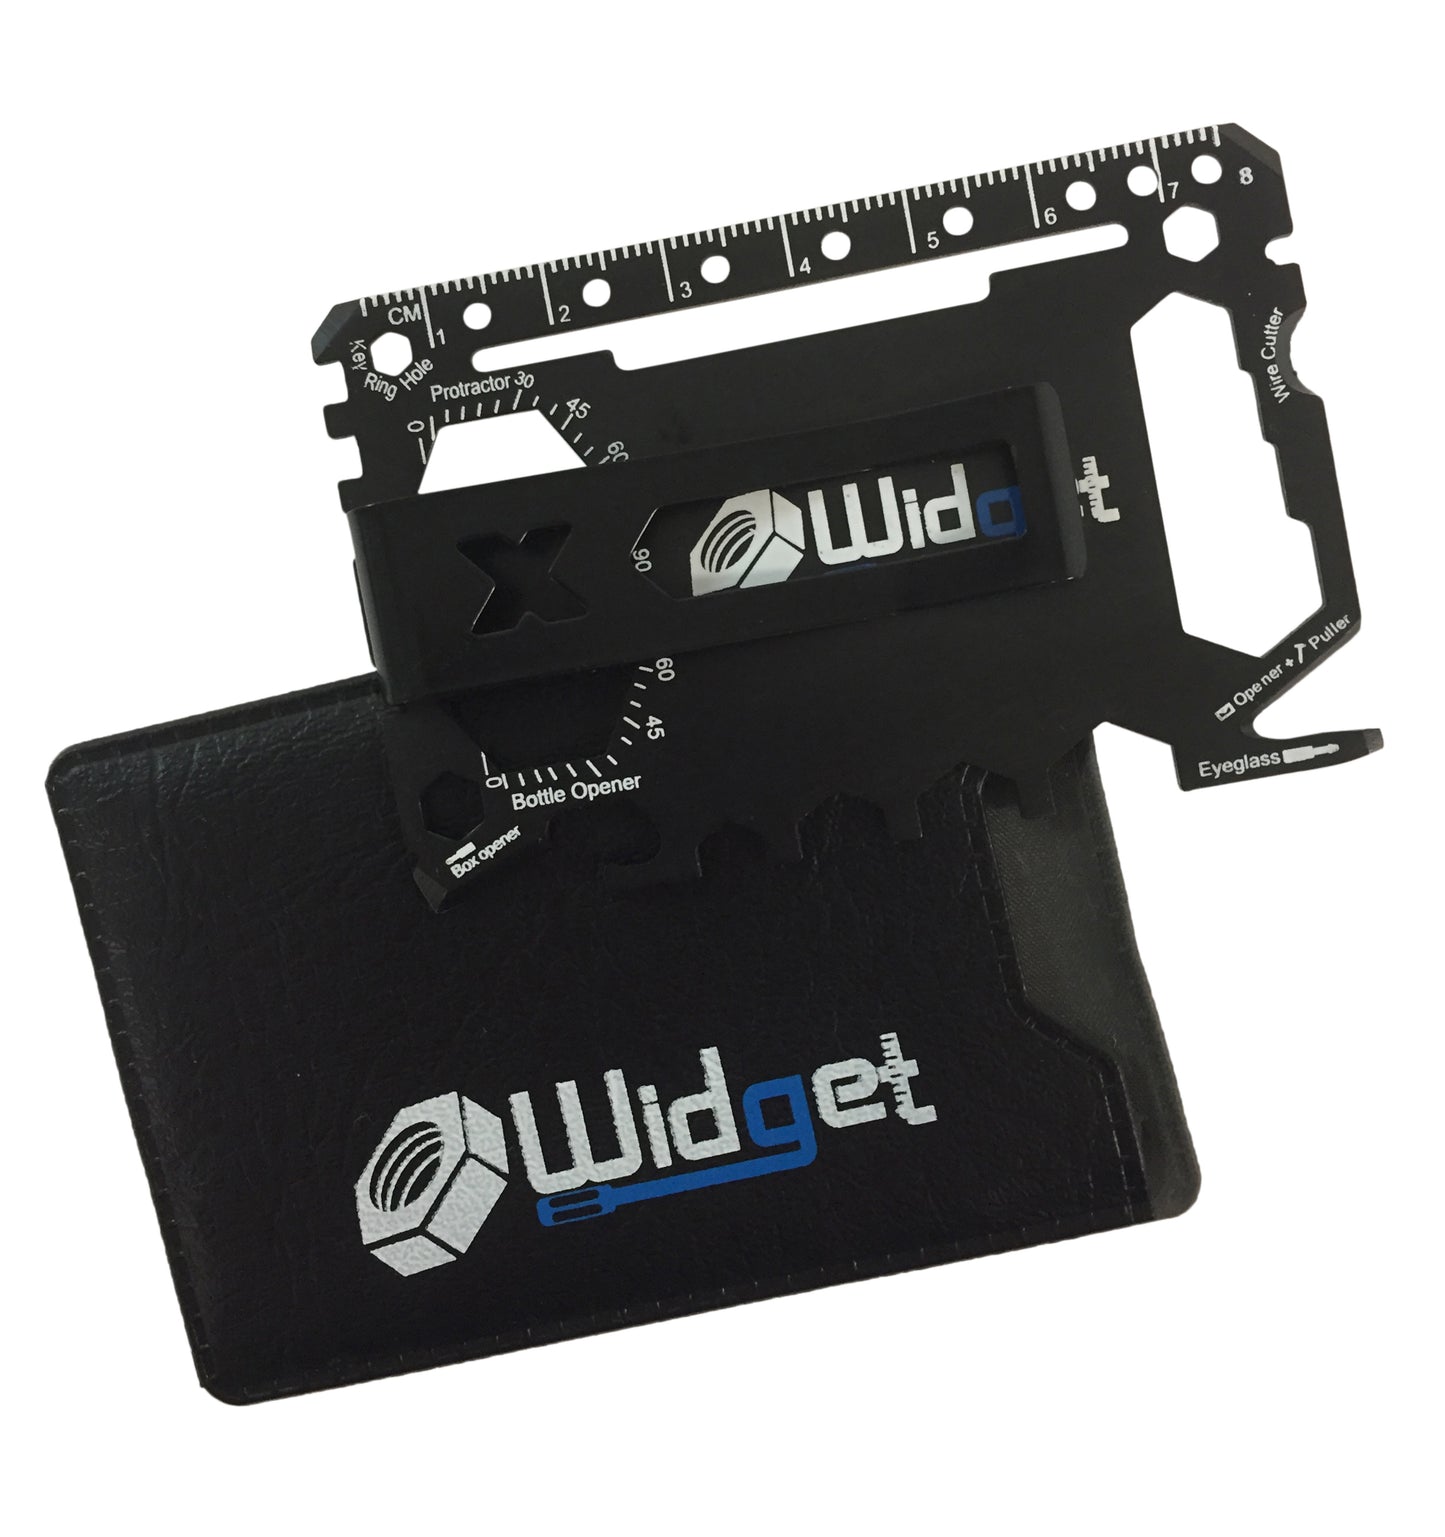 The WIDGET (43-in-1 Credit Card Size Multi-tool)